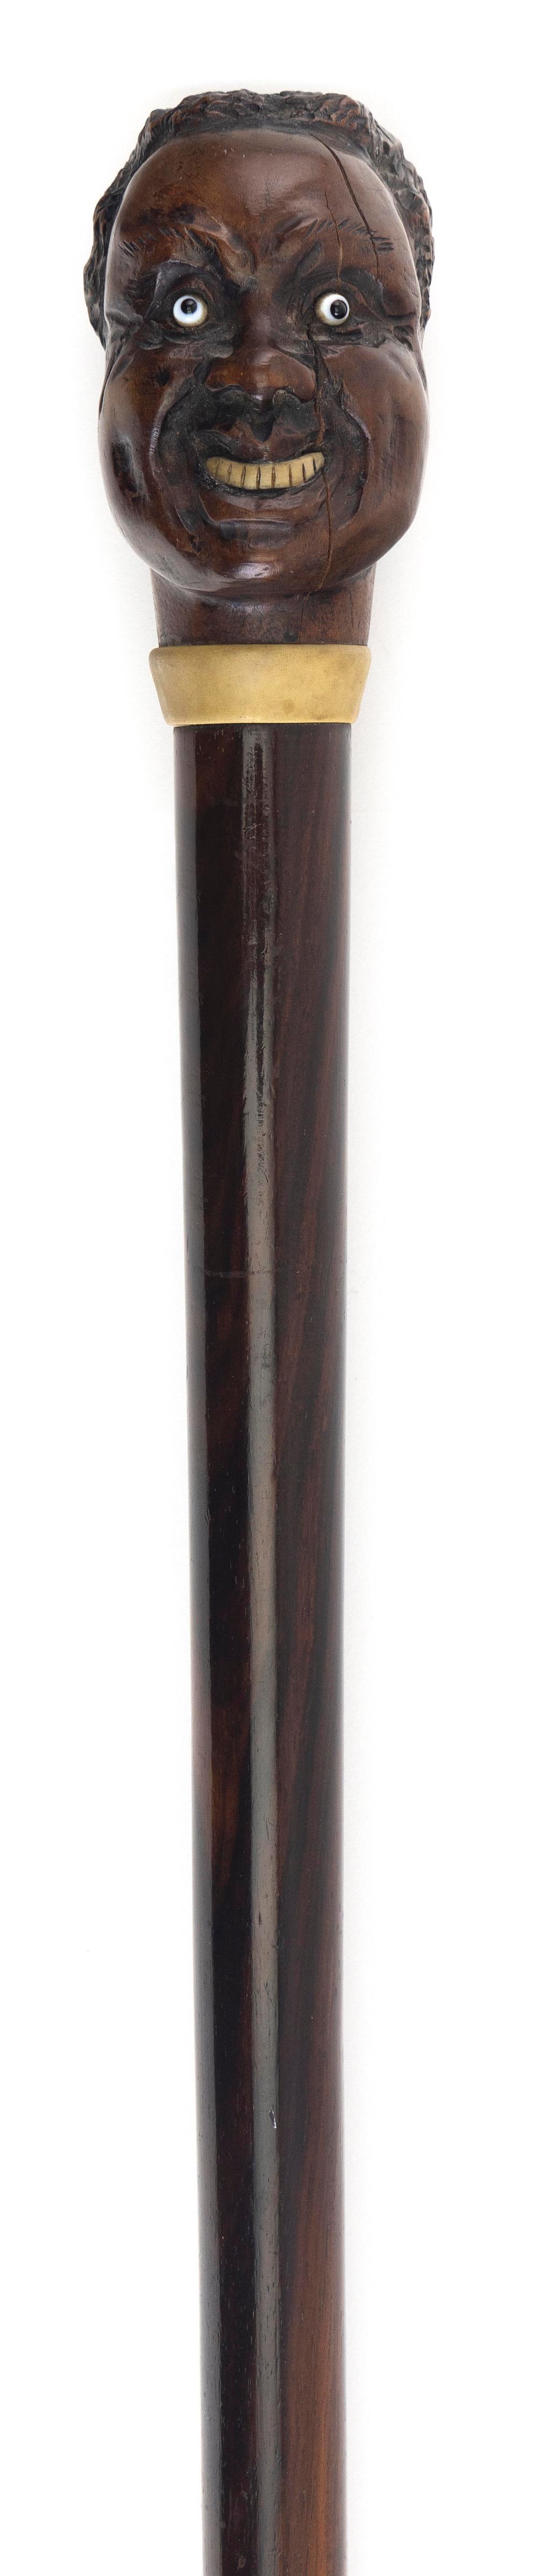 CARVED CANE 19TH CENTURY LENGTH